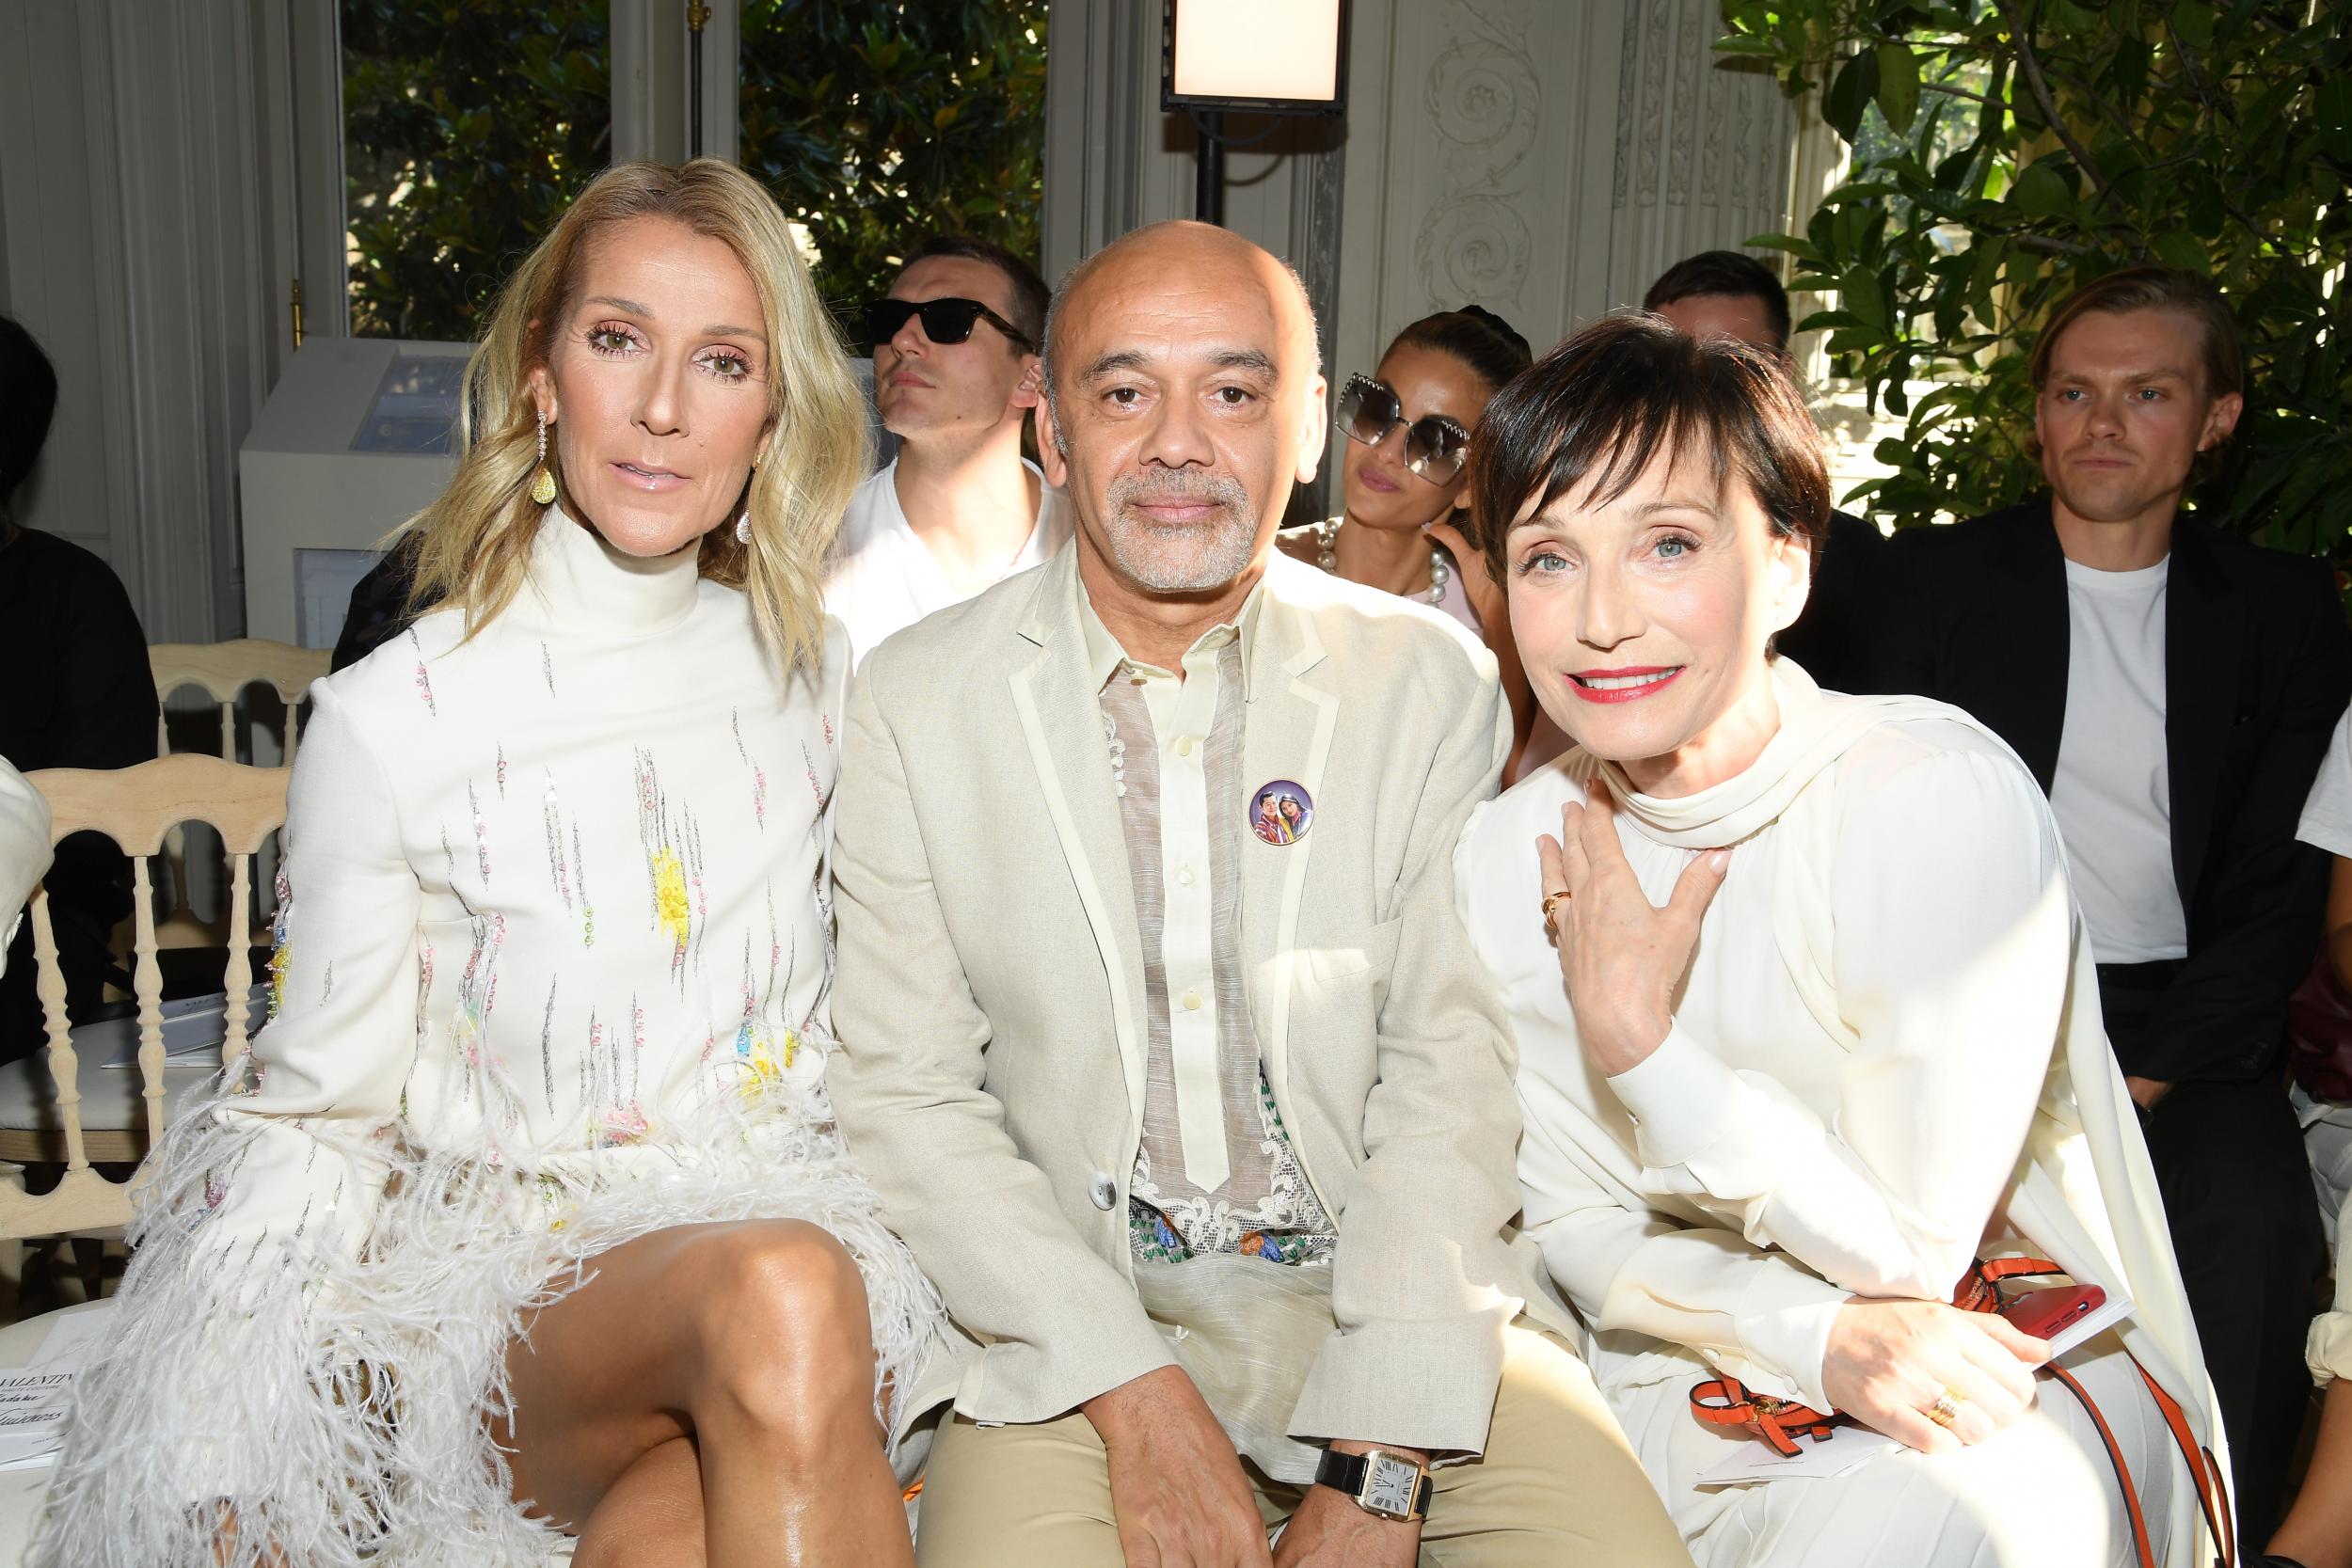 Louboutin with Celine Dion and Kristen Scott Thomas at the Valentino Haute Couture fashion show on Wednesday